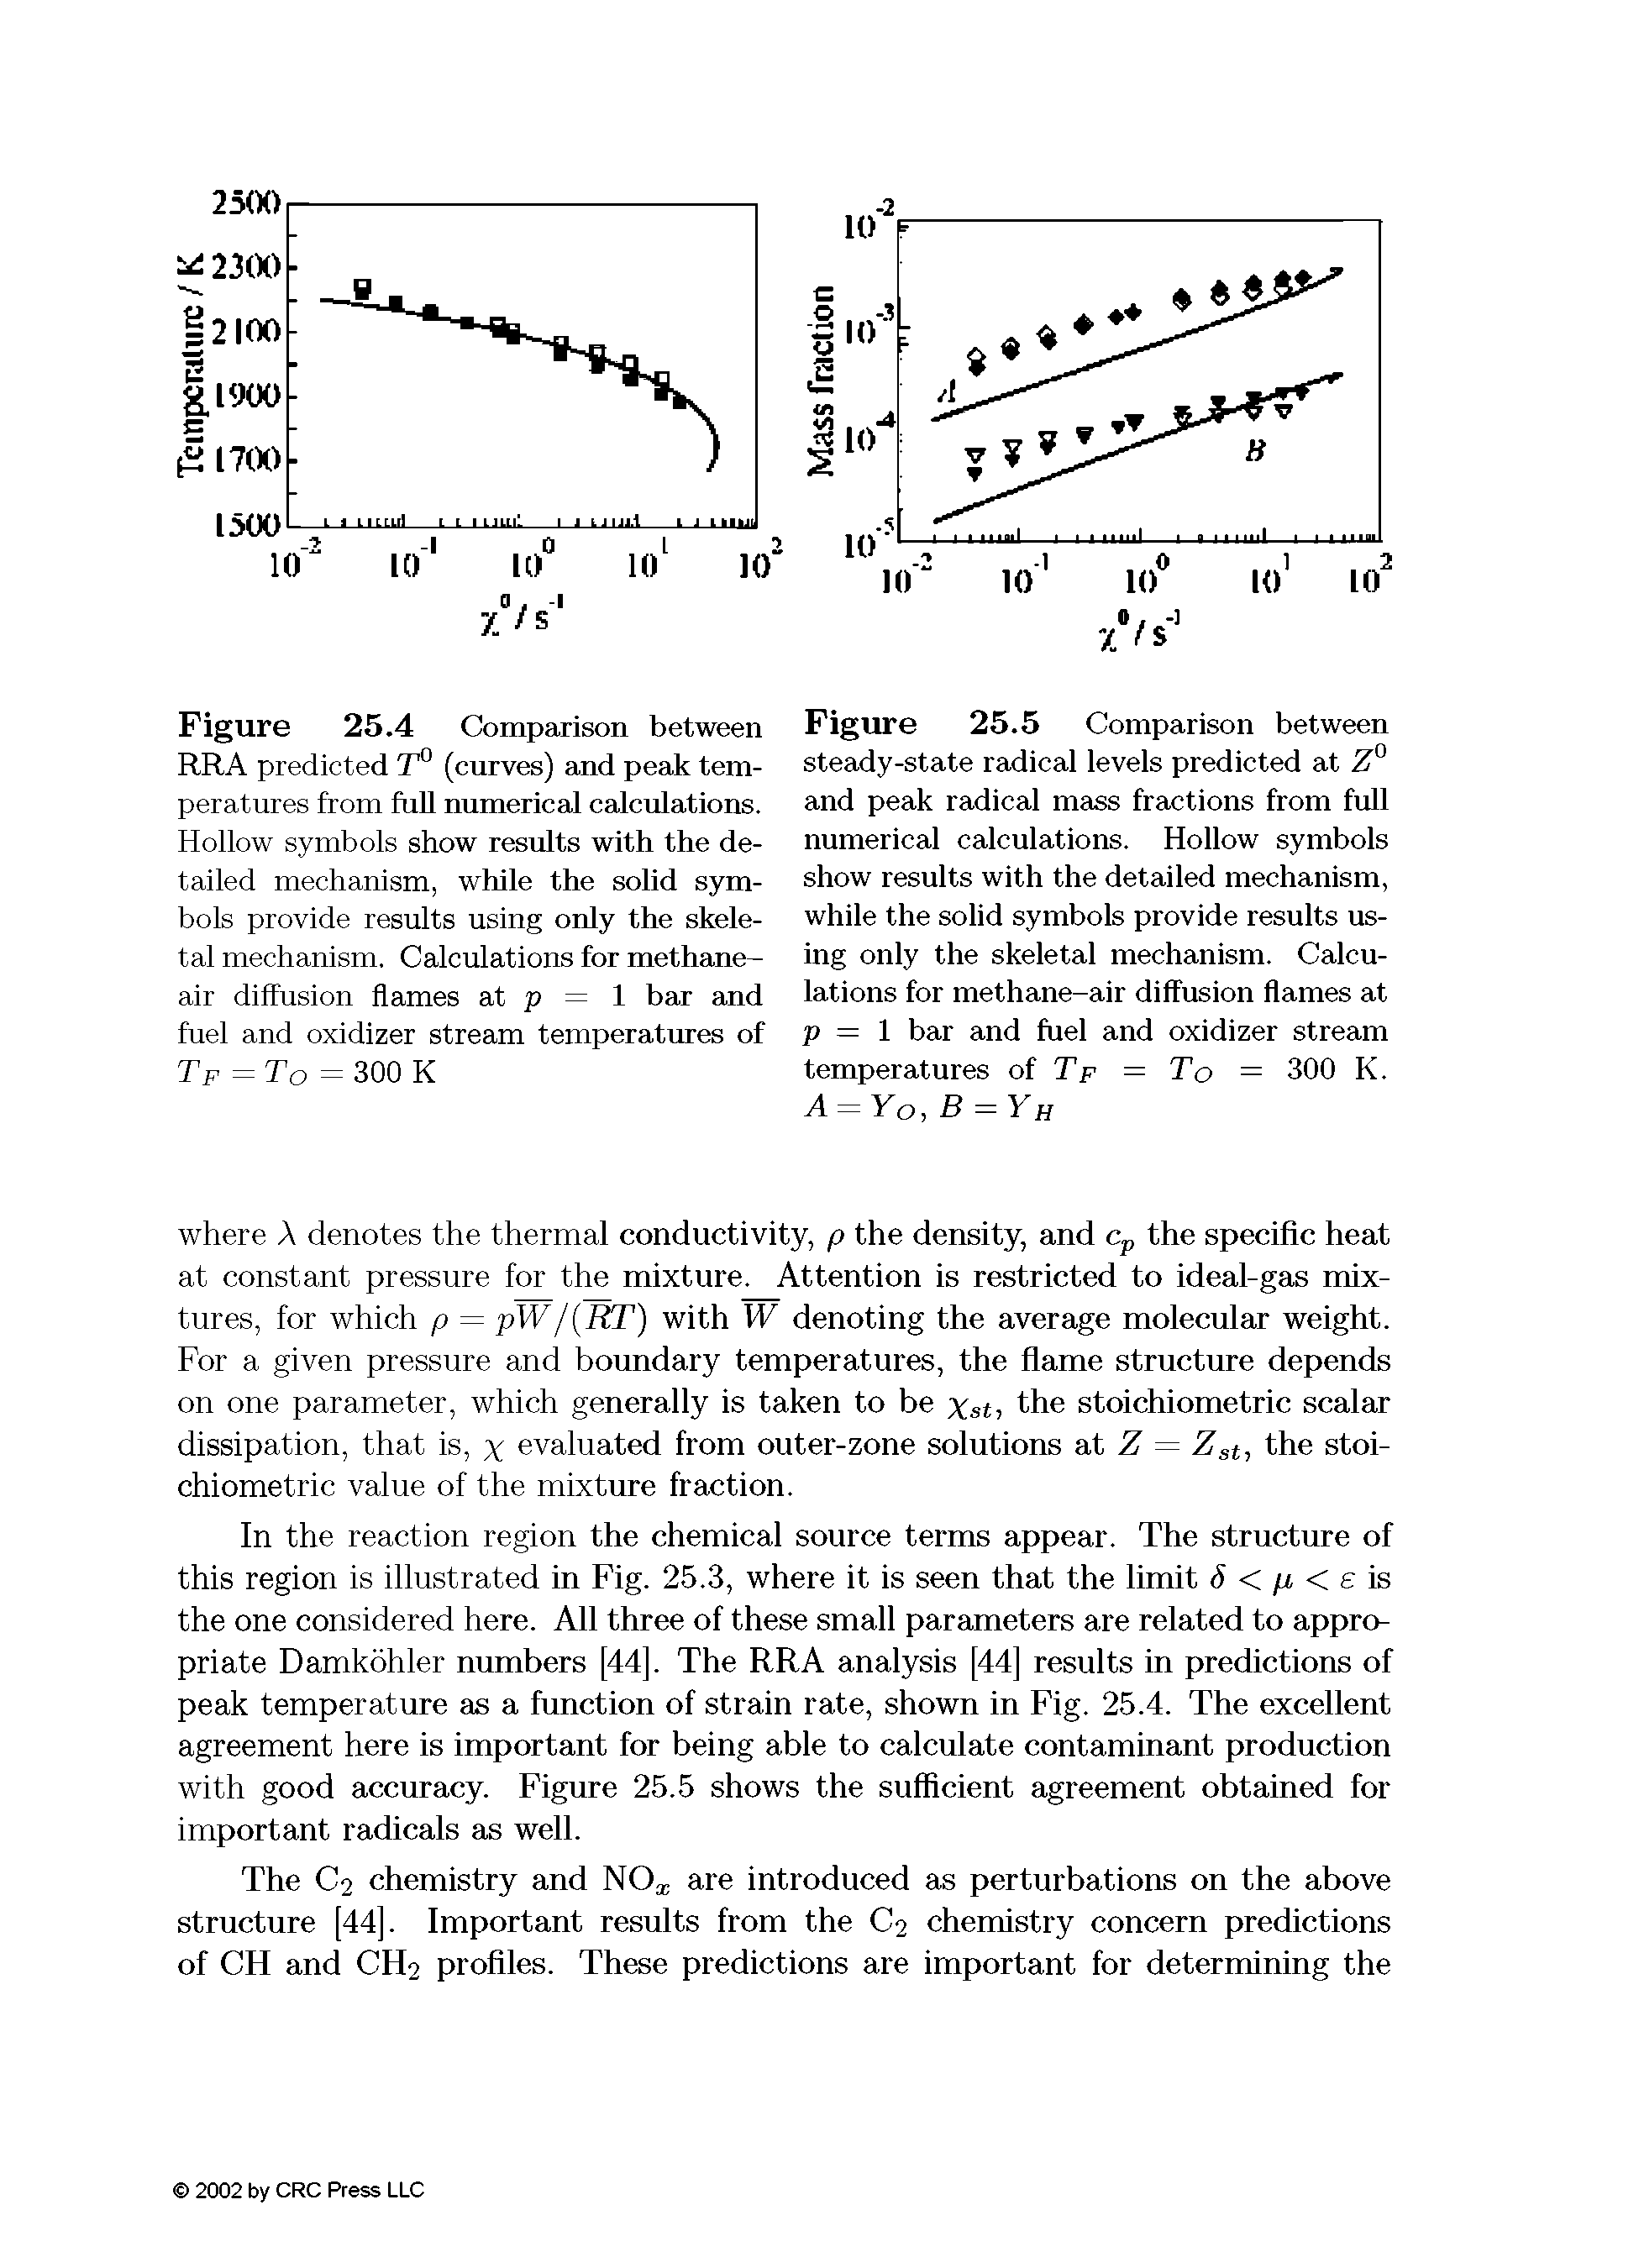 Figure 25.5 Comparison between steady-state radical levels predicted at Z° and peak radical mass fractions from full numerical calculations. Hollow symbols show results with the detailed mechanism, while the solid symbols provide results using only the skeletal mechanism. Calculations for methane-air diffusion flames at p = 1 bar and fuel and oxidizer stream temperatures of Tf = To = 300 K. A = Yo,B = Yh...